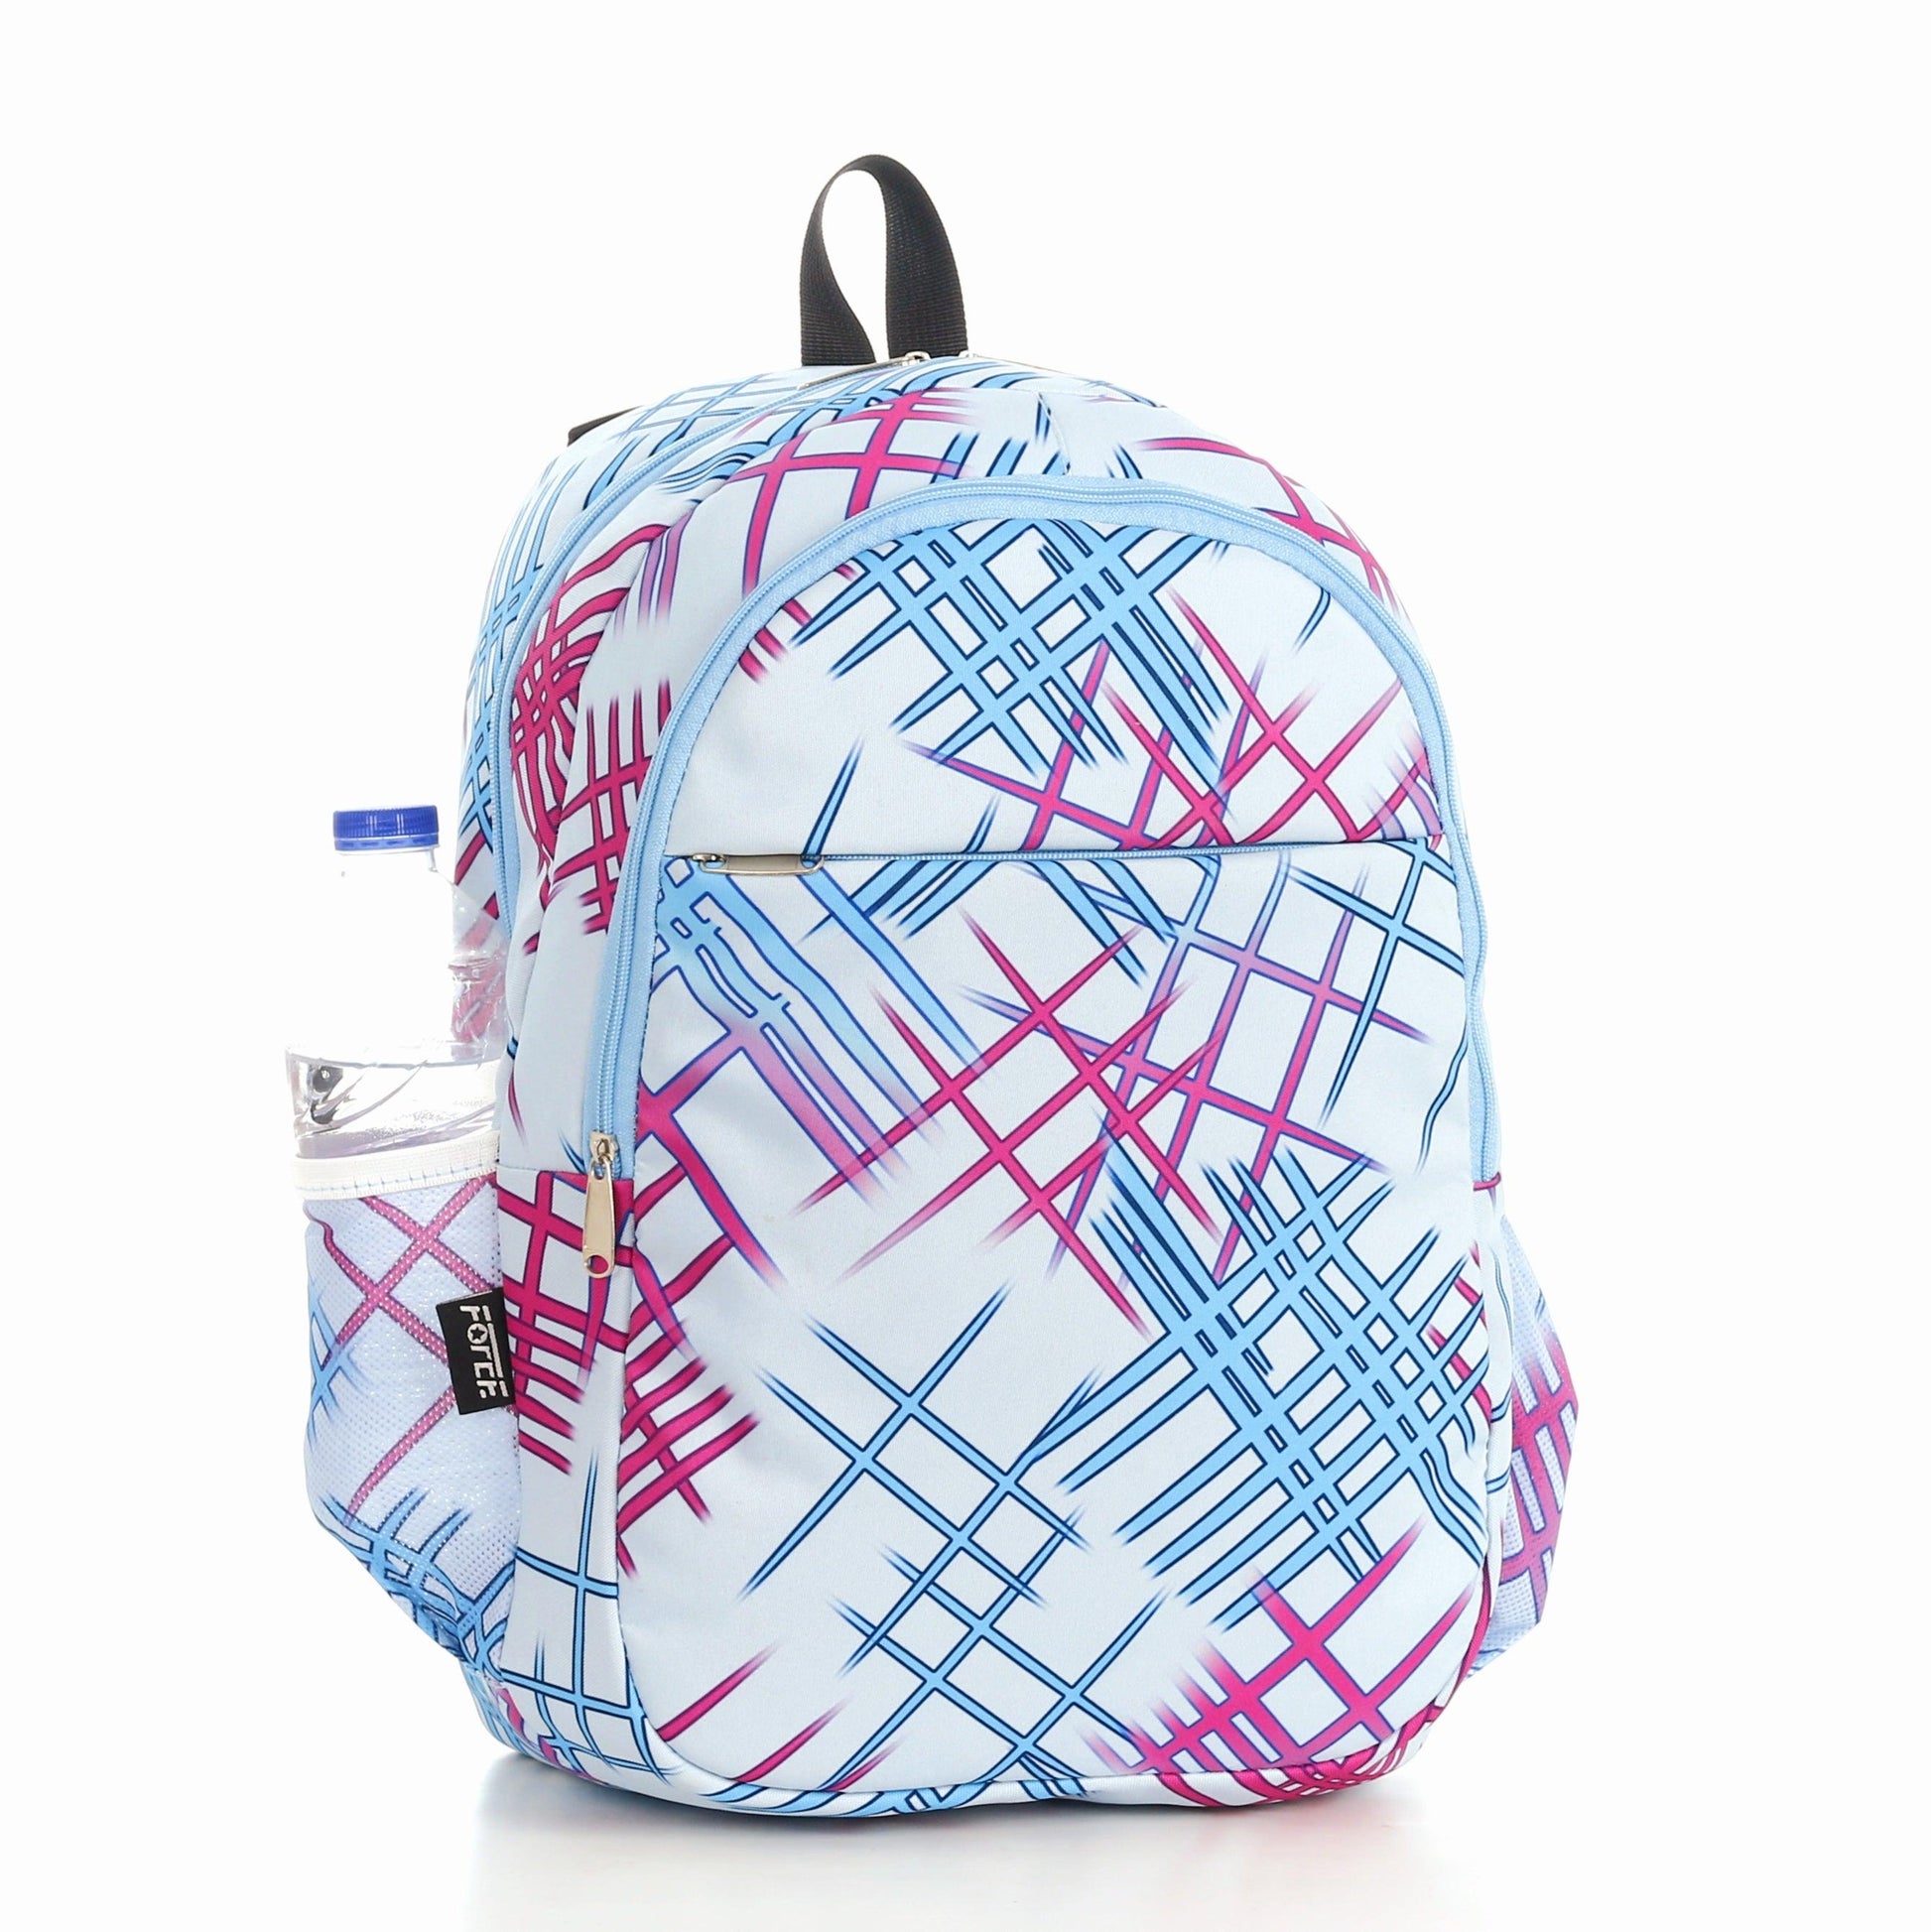 Force Backpack Unisex -blue & pink pattern - new edition - FNE-009 - FORCE STORES